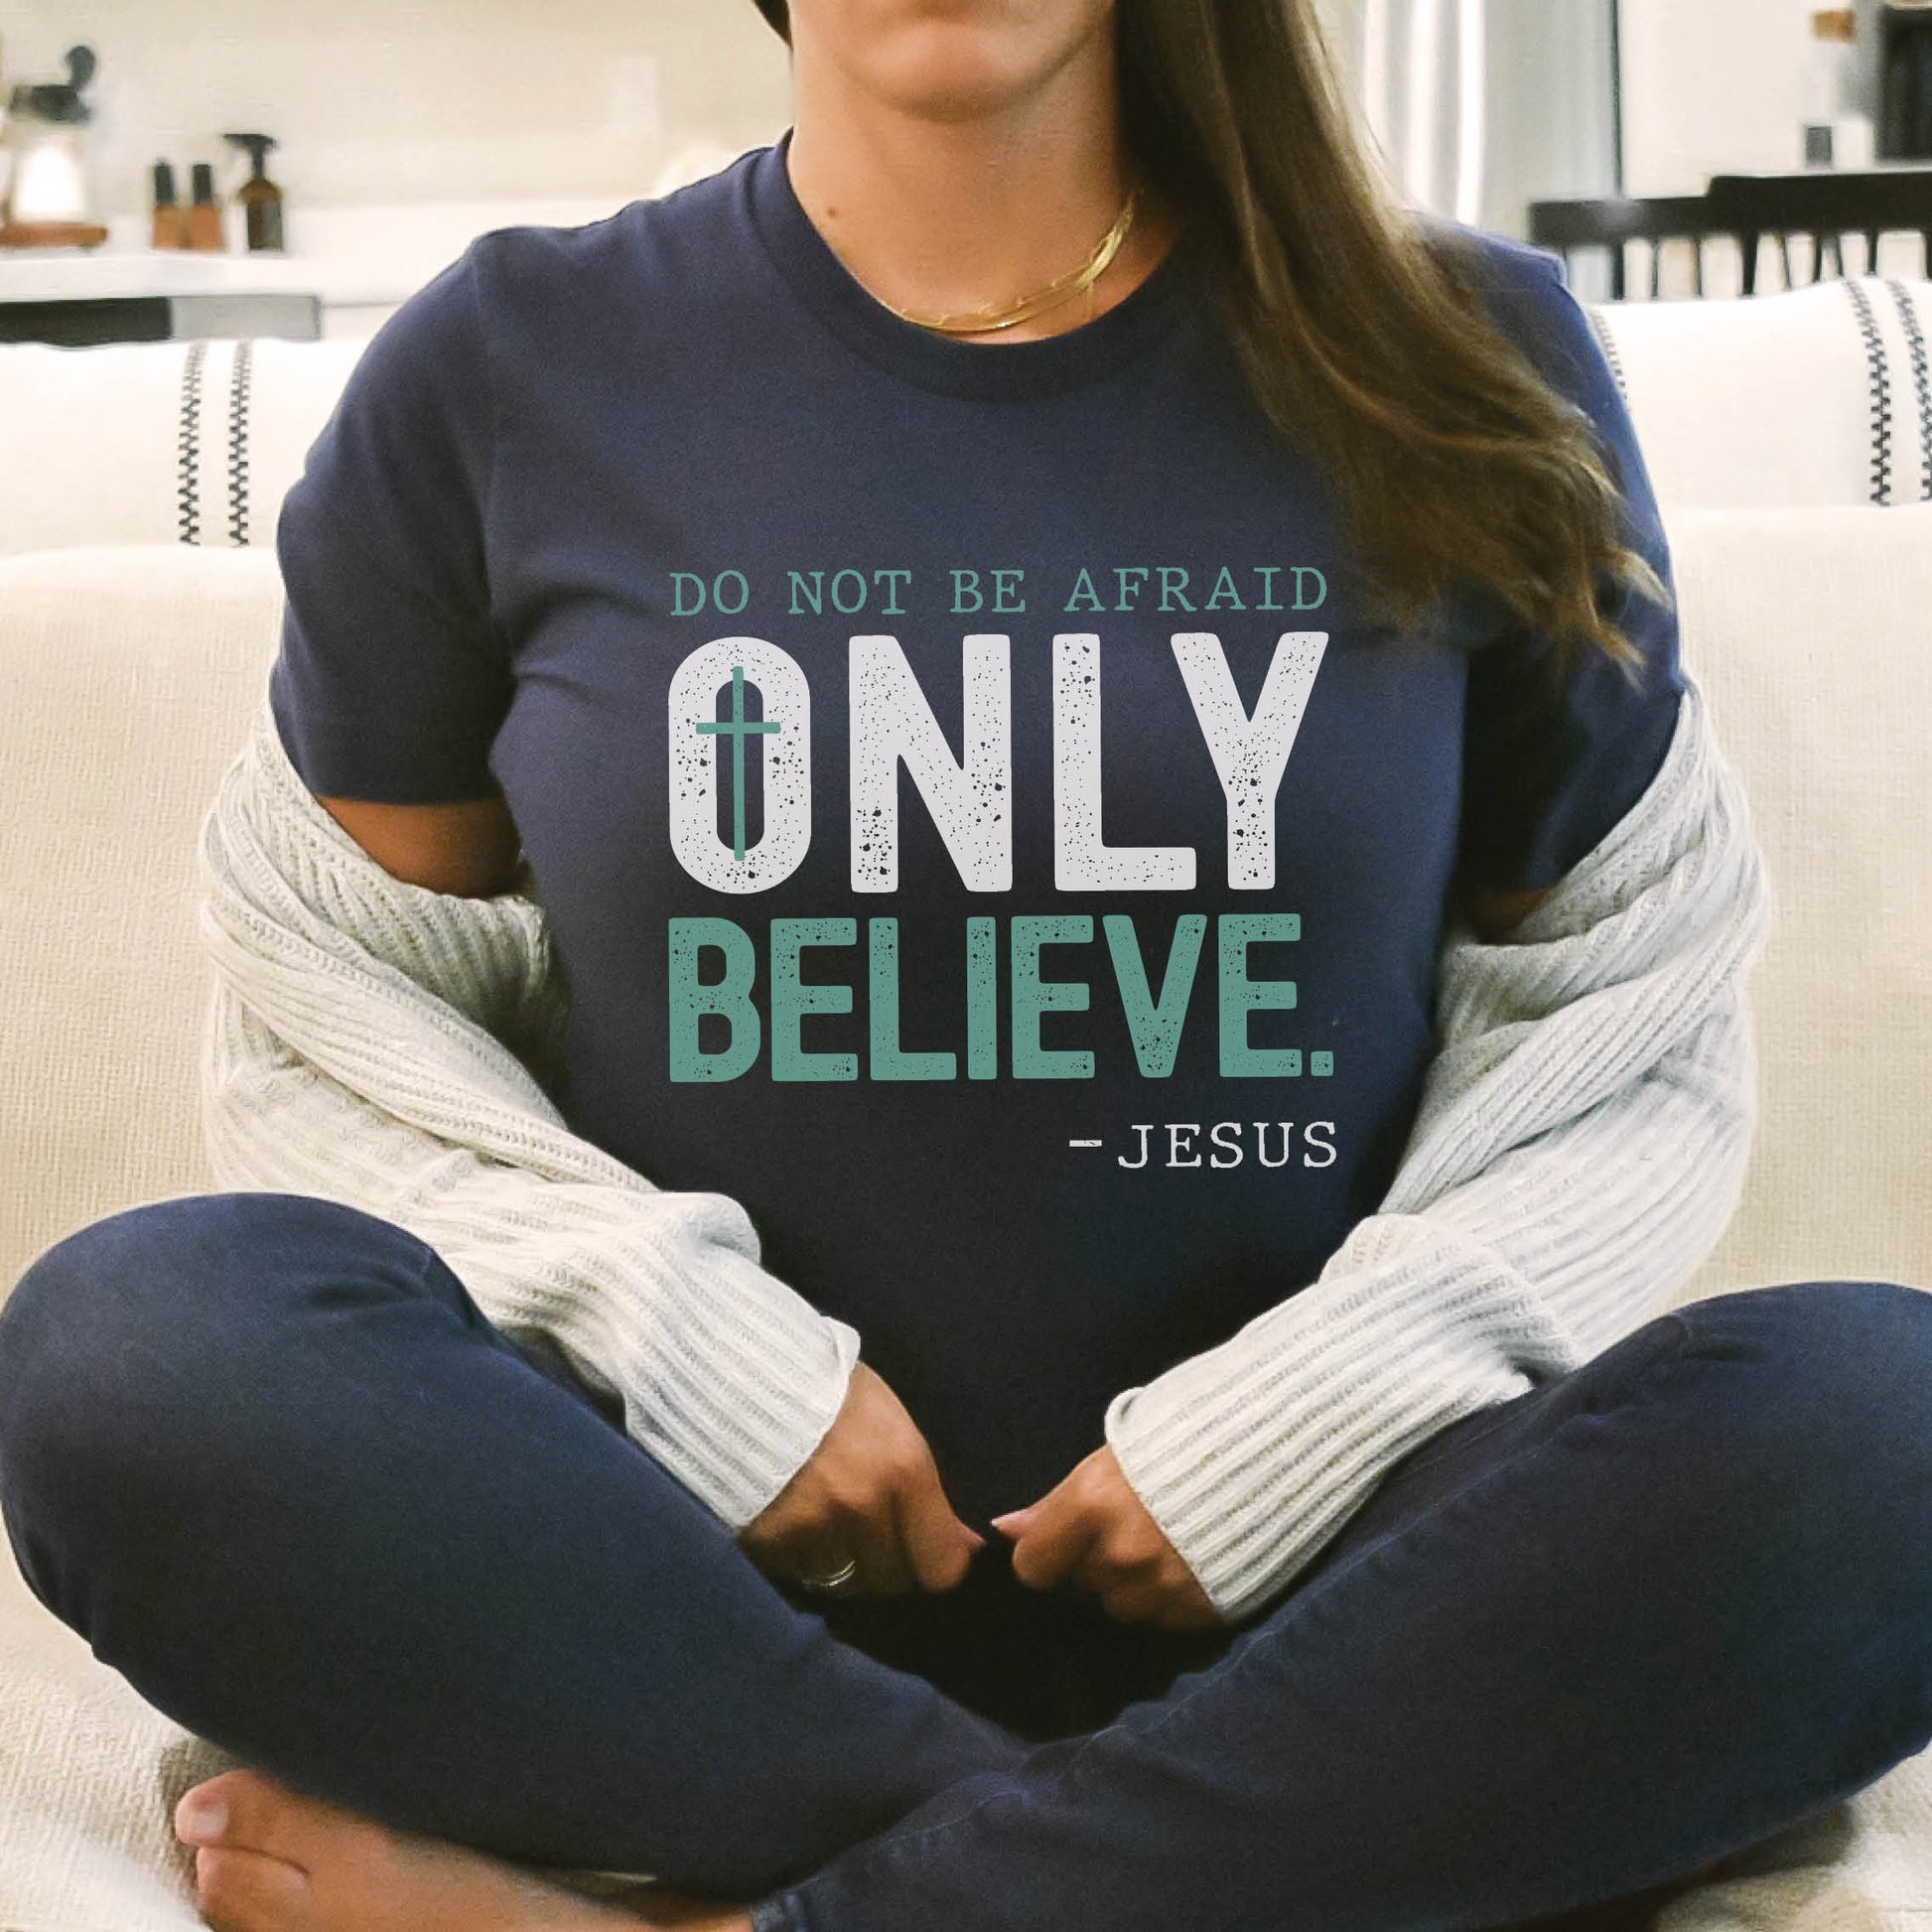 Do Not Be Afraid, Only Believe, Jesus Quote Mark 5:36 healing miracle bible verse textured white and teal wording printed on soft navy blue unisex t-shirt for men and women